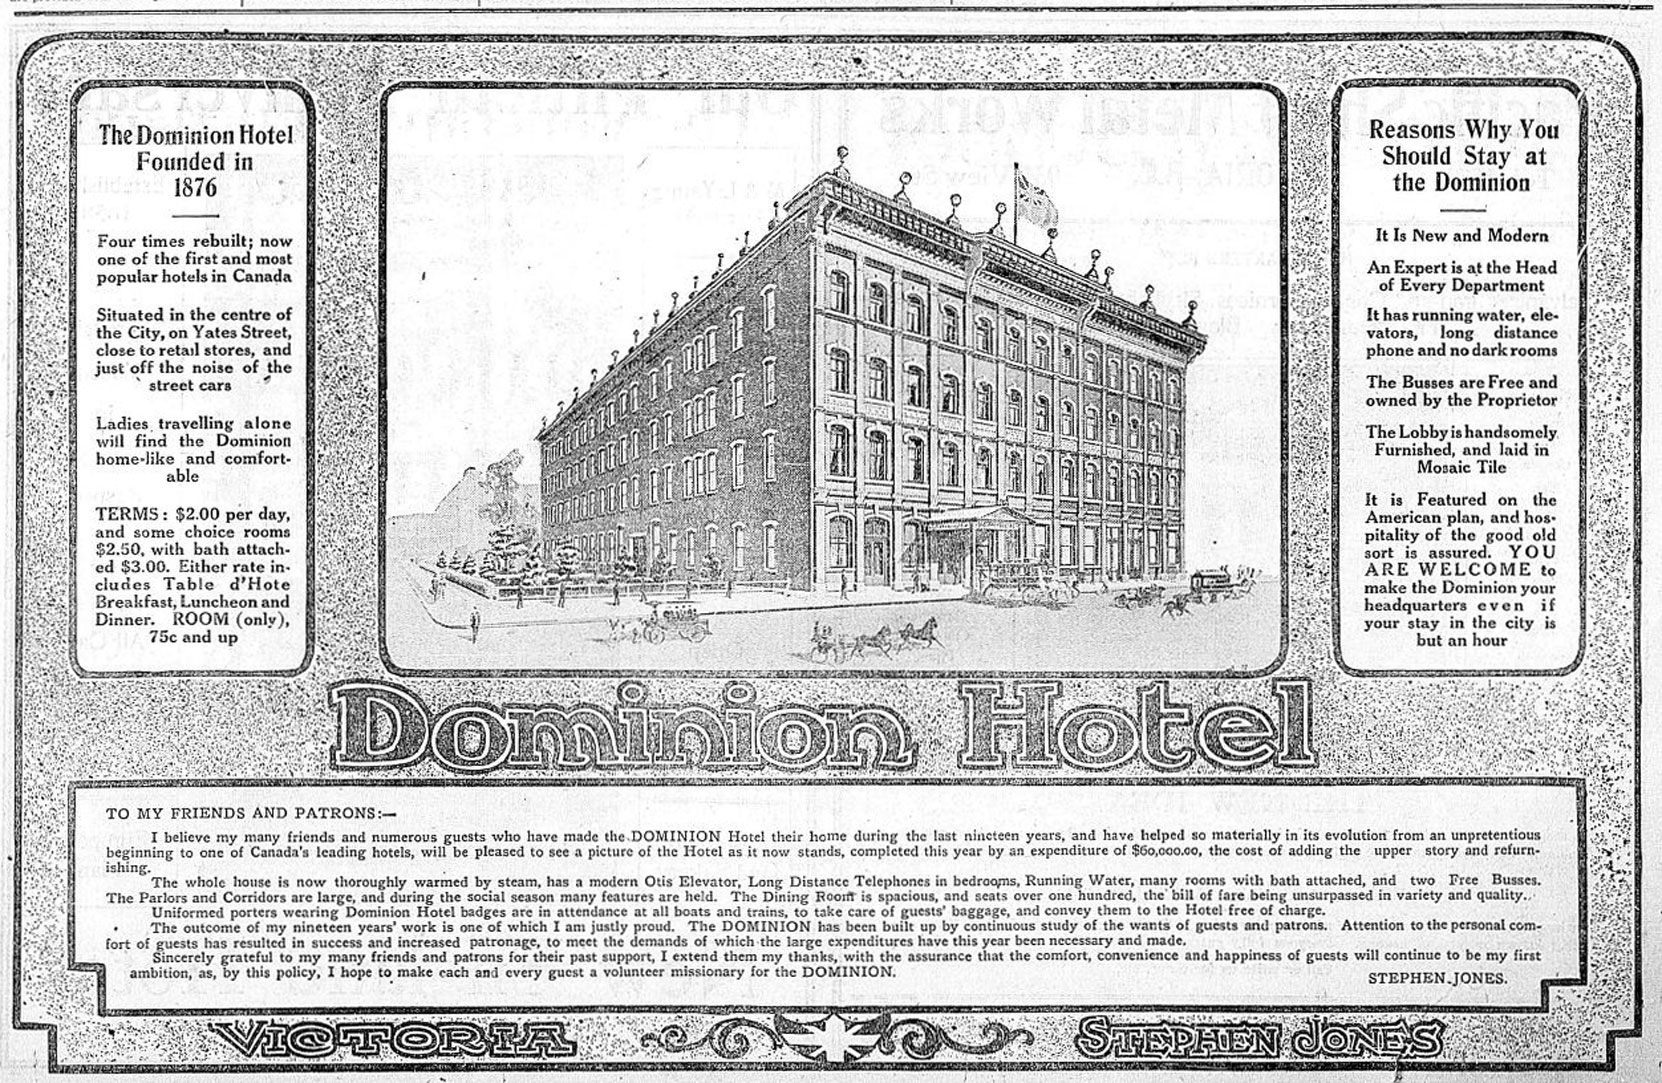 1908 advertisement for the Dominion Hotel, The illustration makes the building appear far deeper, adding several banks of windows which aren't actually on the building. (Victoria Online Sightseeing Tours collection)